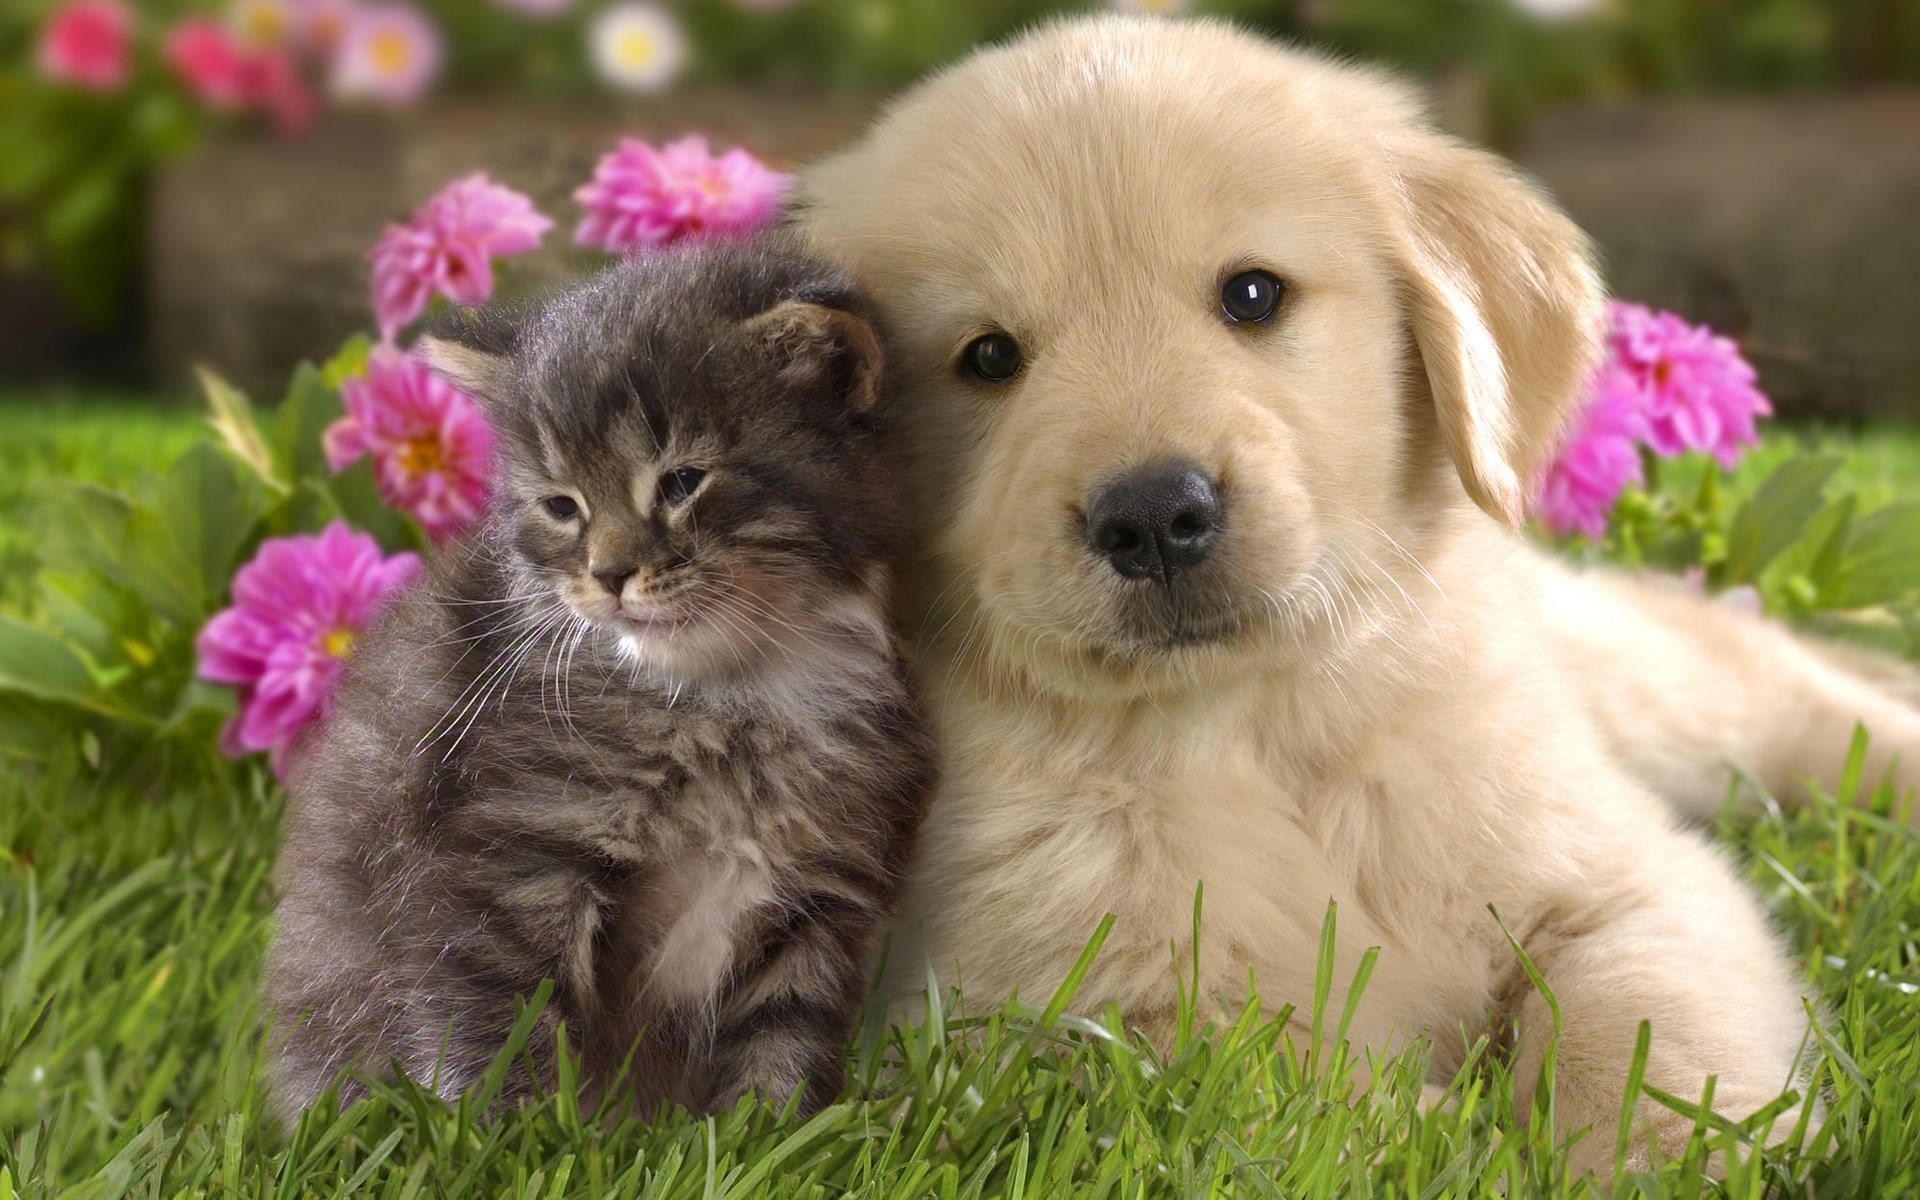 Download Cute Kitten And Puppy Wallpaper Wallpapers - Pets Dogs And Cats , HD Wallpaper & Backgrounds